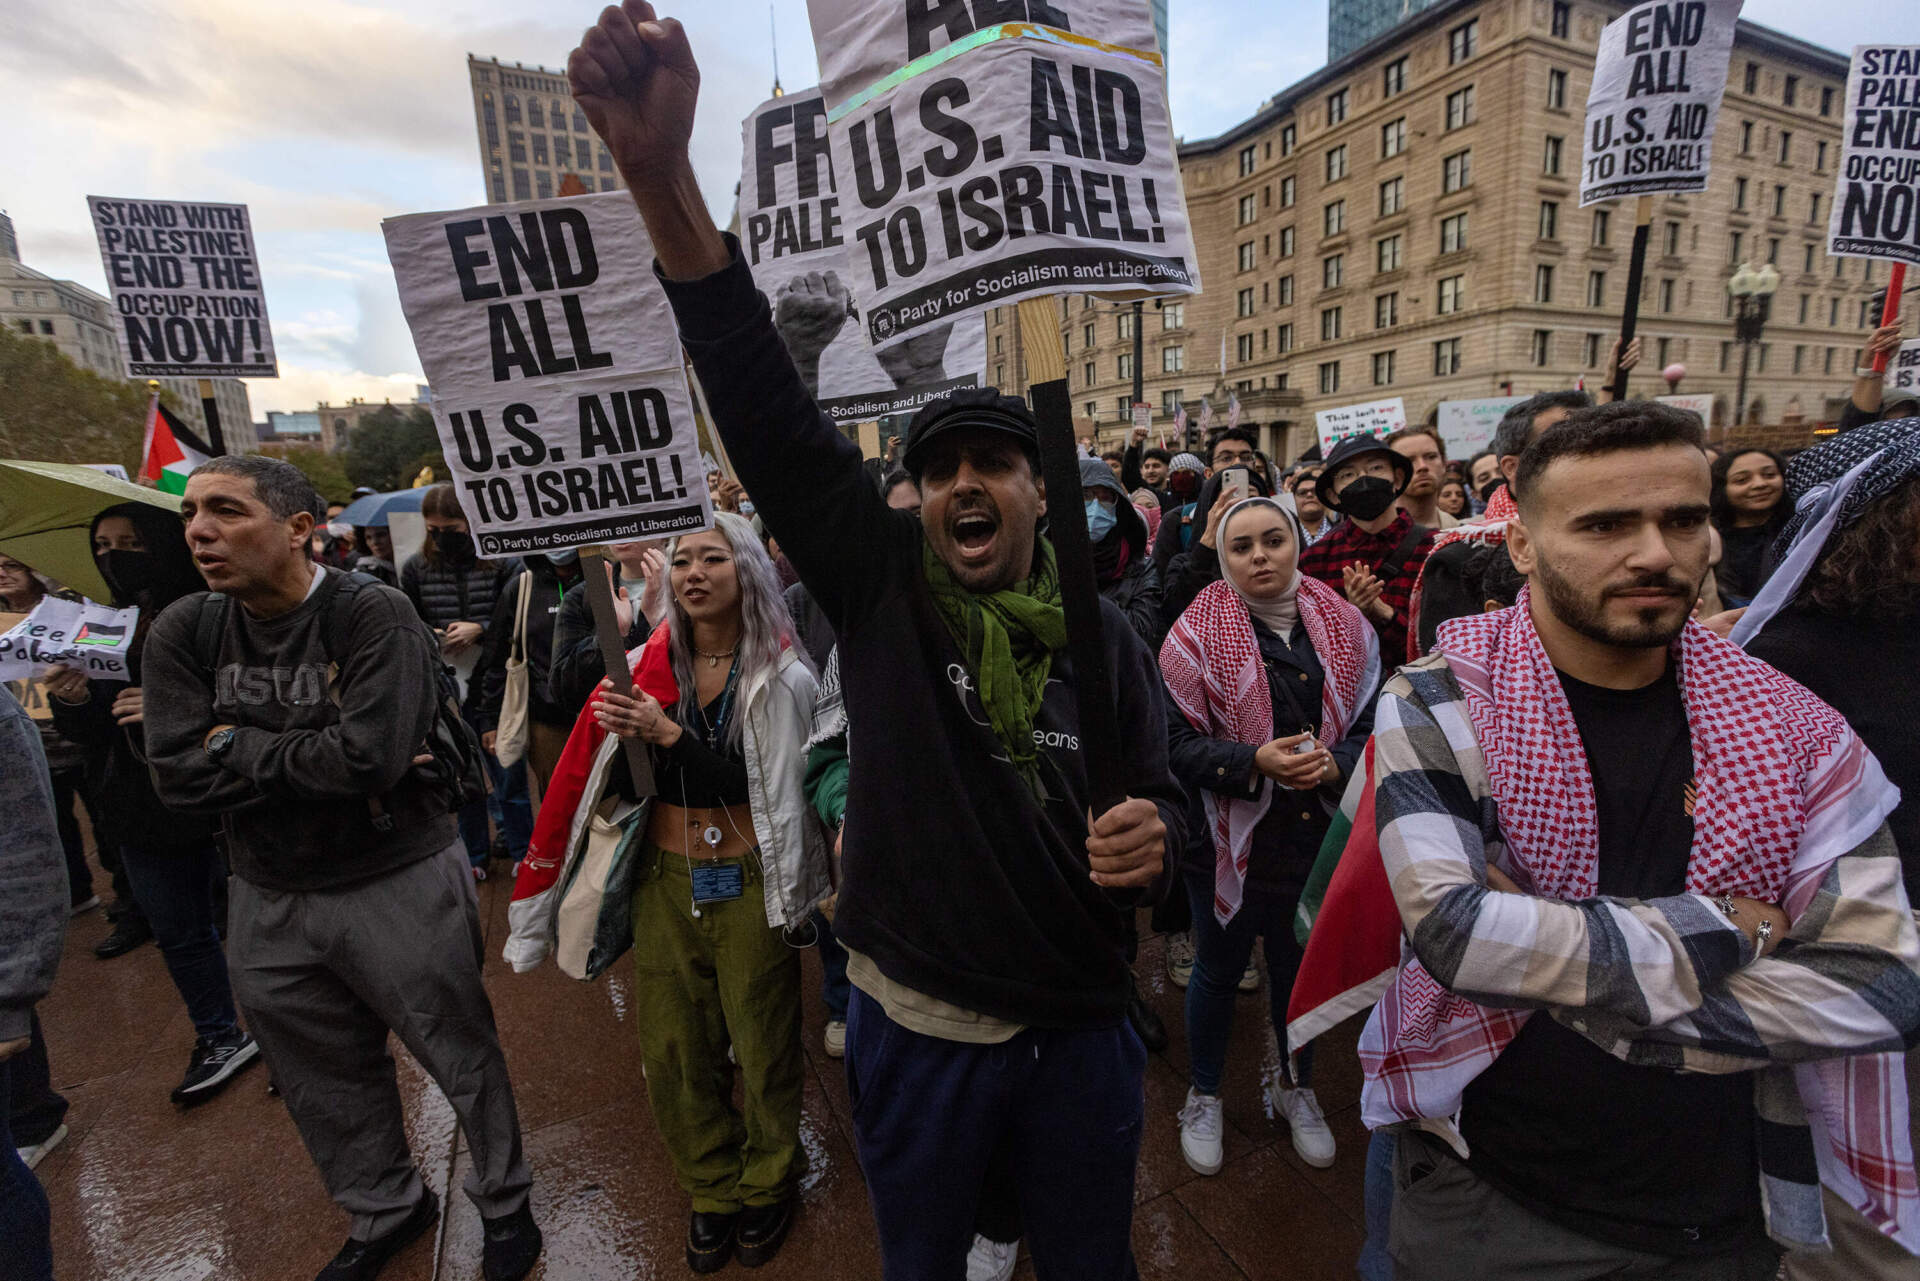 Protesters hold signs that call for an end to U.S. aid to Israel. (Jesse Costa/WBUR)